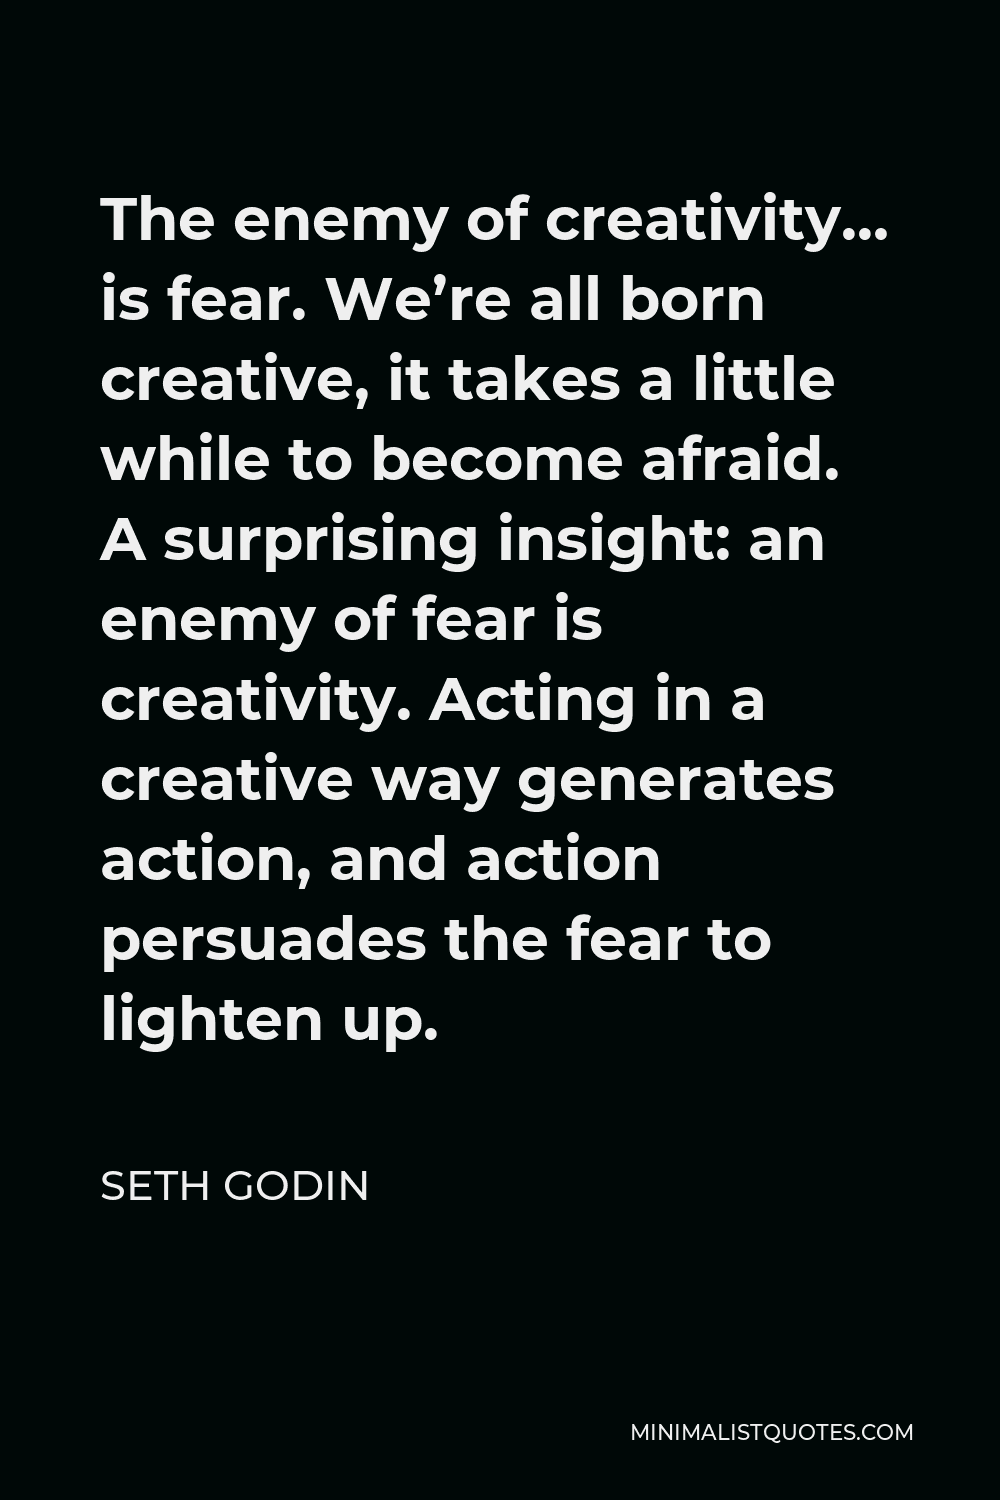 Seth Godin Quote - The enemy of creativity… is fear. We’re all born creative, it takes a little while to become afraid. A surprising insight: an enemy of fear is creativity. Acting in a creative way generates action, and action persuades the fear to lighten up.